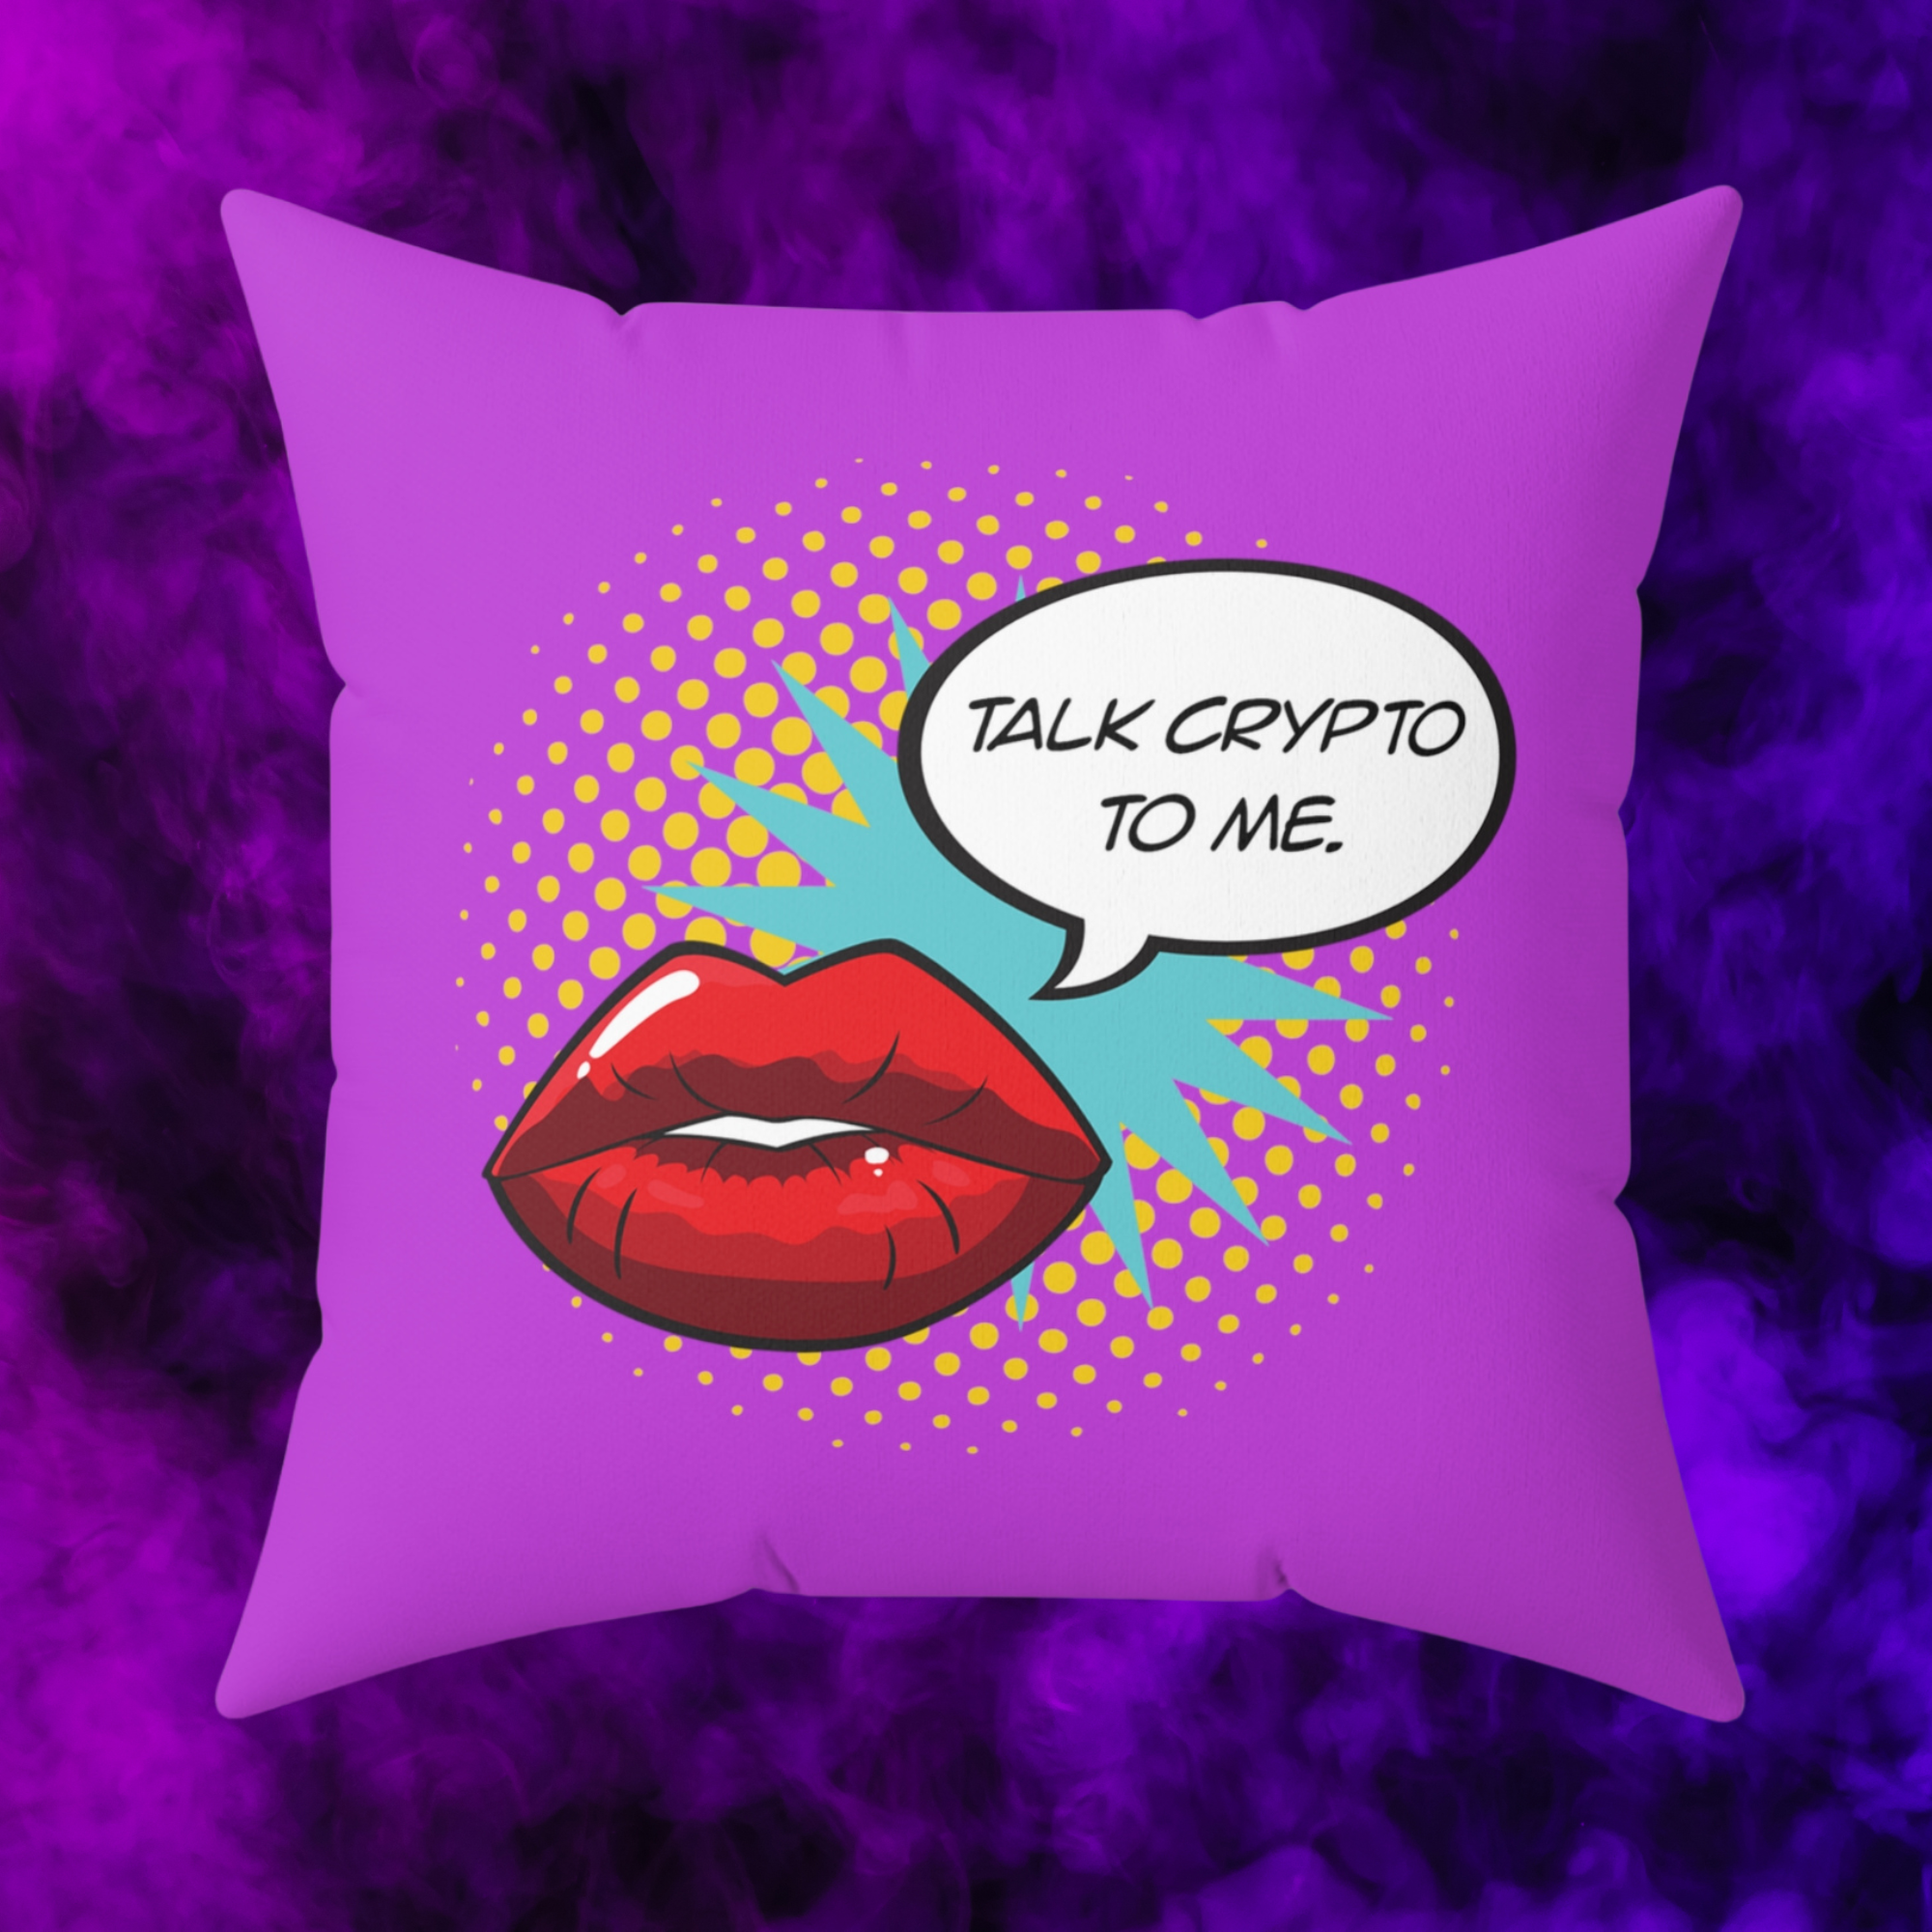 Crypto Home Decor - Talk Crypto To Me Pillow available from NEONCRYPTO STORE.